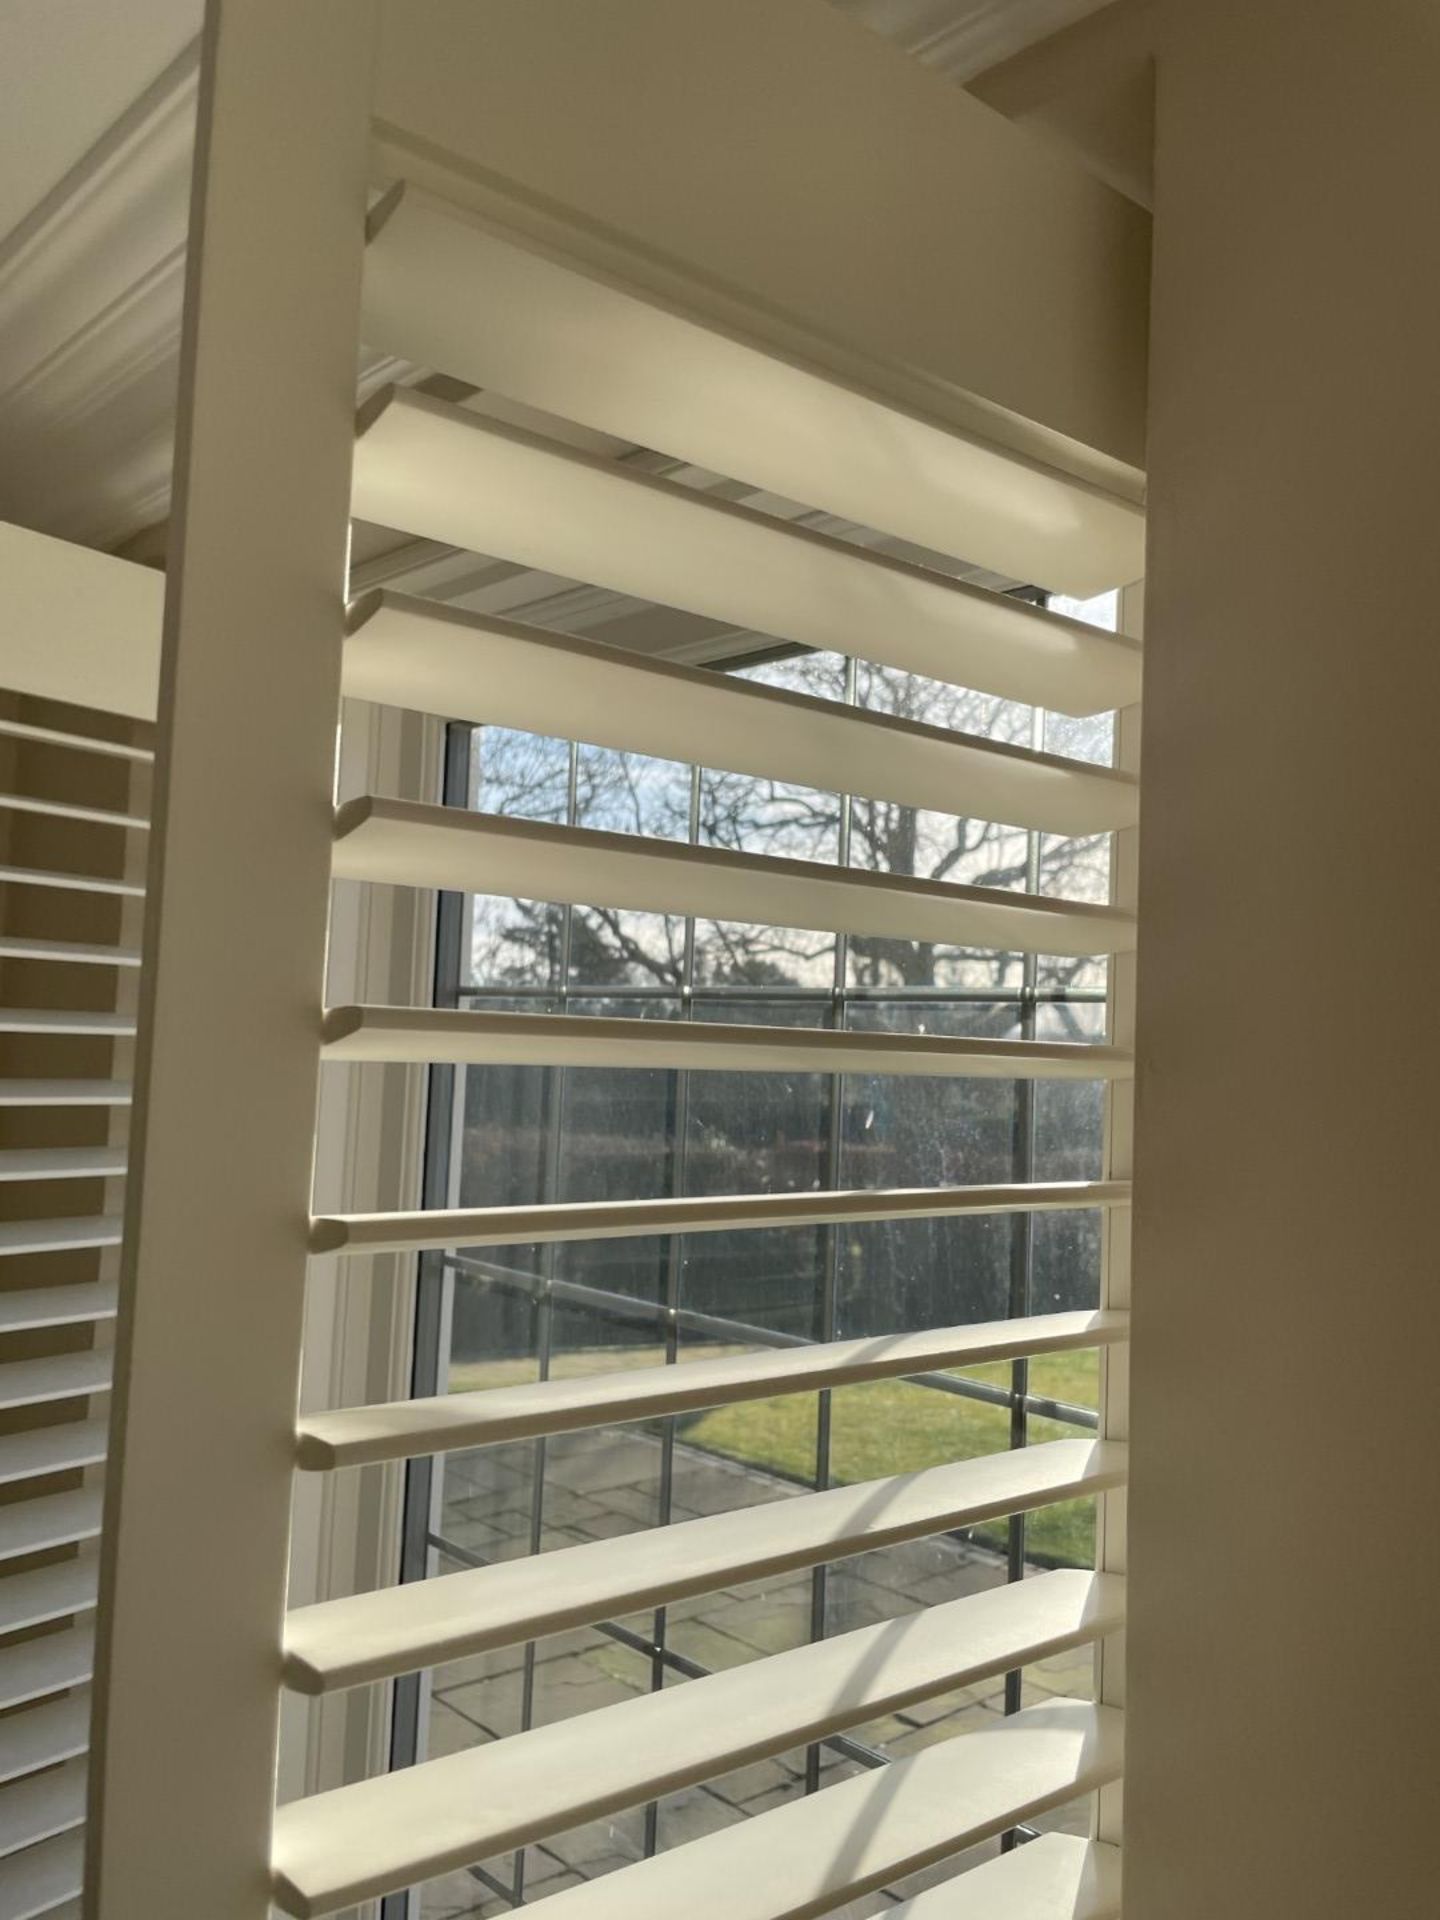 1 x Hardwood Timber Double Glazed Window Frames fitted with Shutter Blinds, In White - Ref: PAN107 - Image 5 of 15